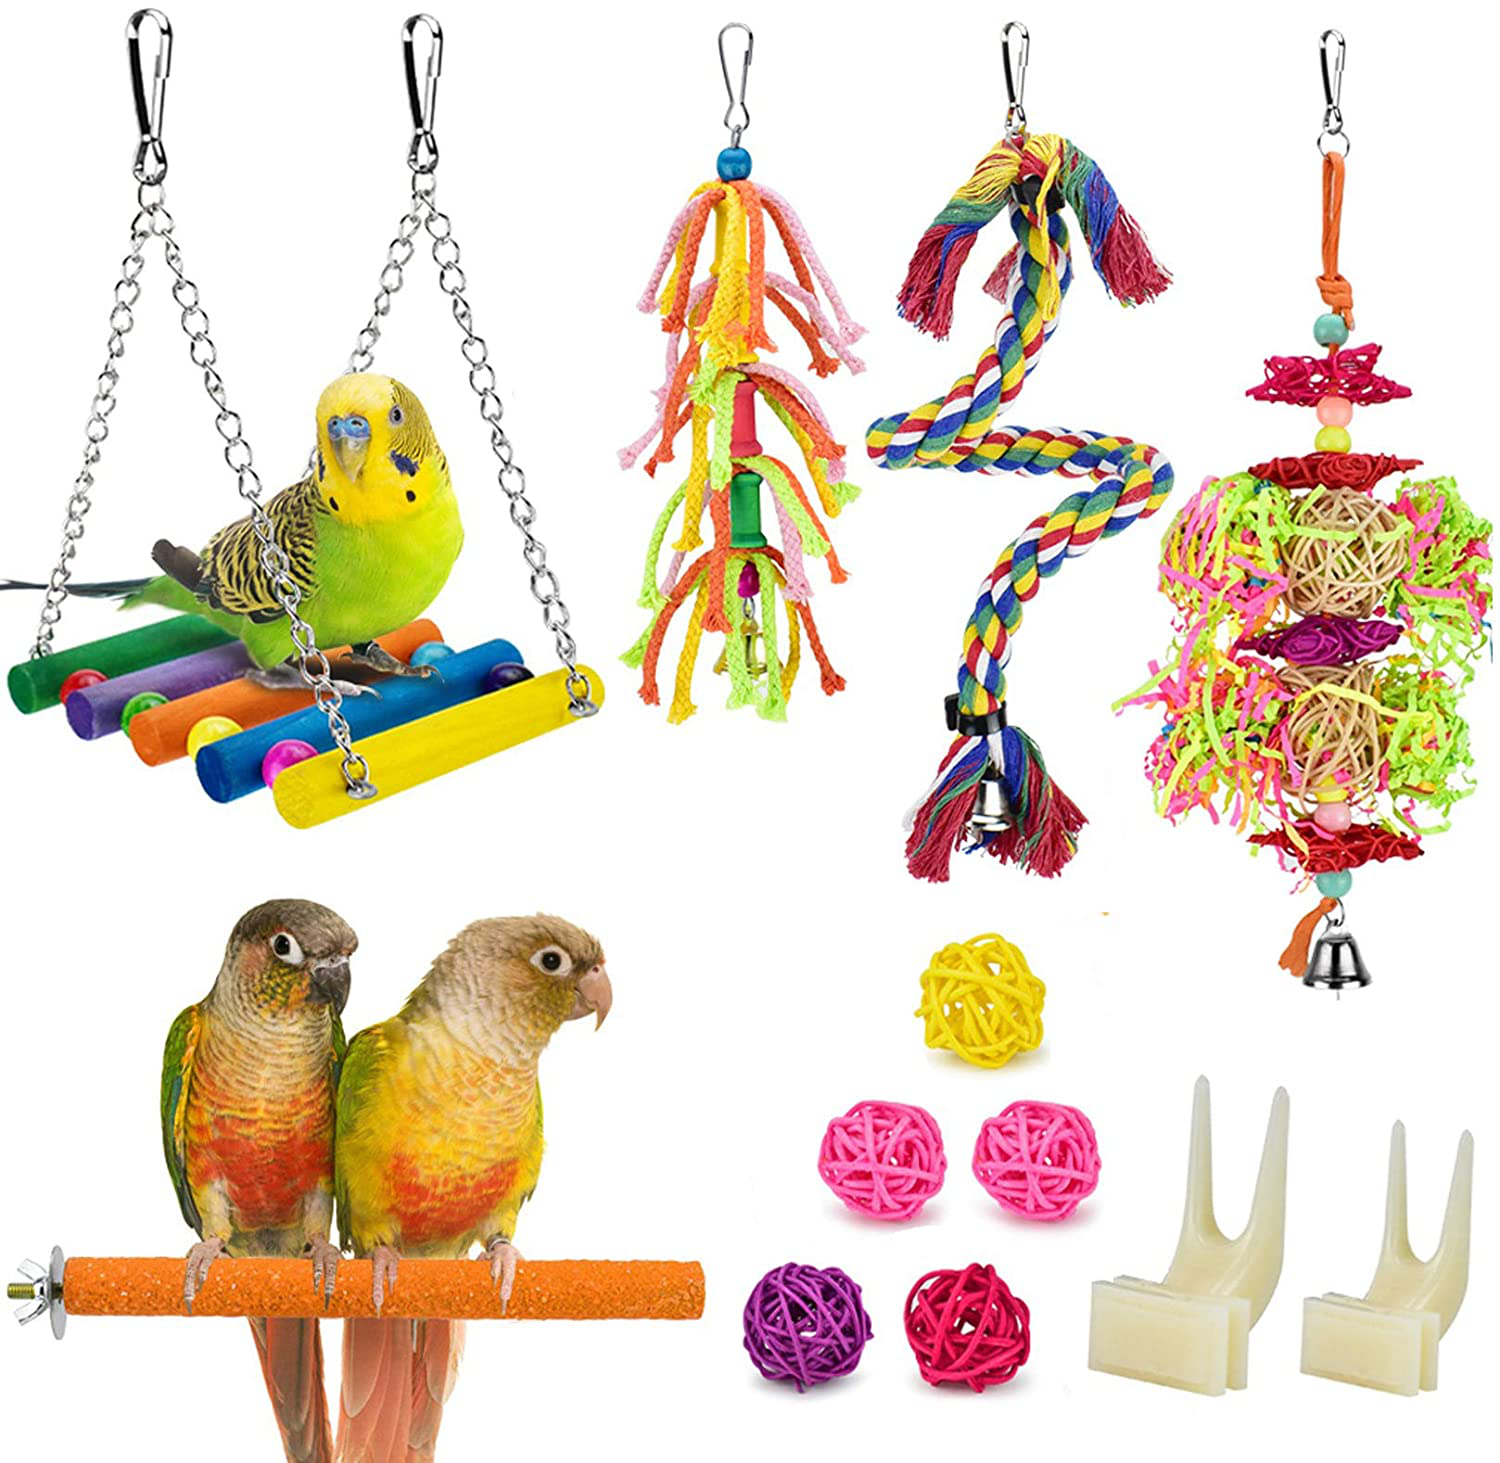 KATUMO Bird Swing Toys, 12 Packs Parrot Chewing Hanging Toys with Bells Rattan Balls Bird Perch Climbing Rope Fruit Forks for Parakeet, Conures, Cockatiel, Mynah, Lovebirds, Finch, Small Pet Birds